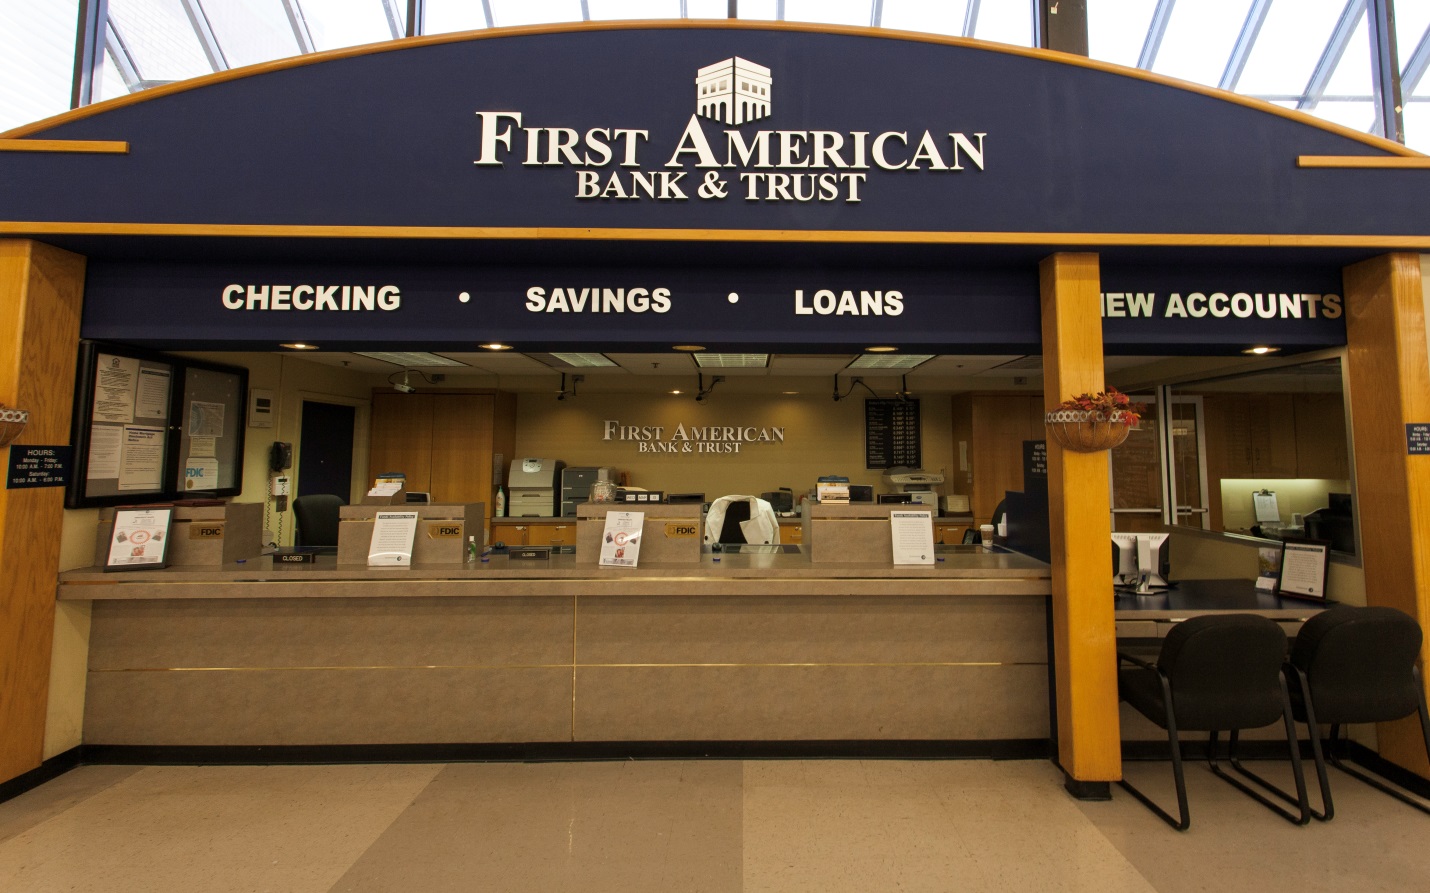 First American Bank & Trust Athens GA 2301 College Station Road 30605.